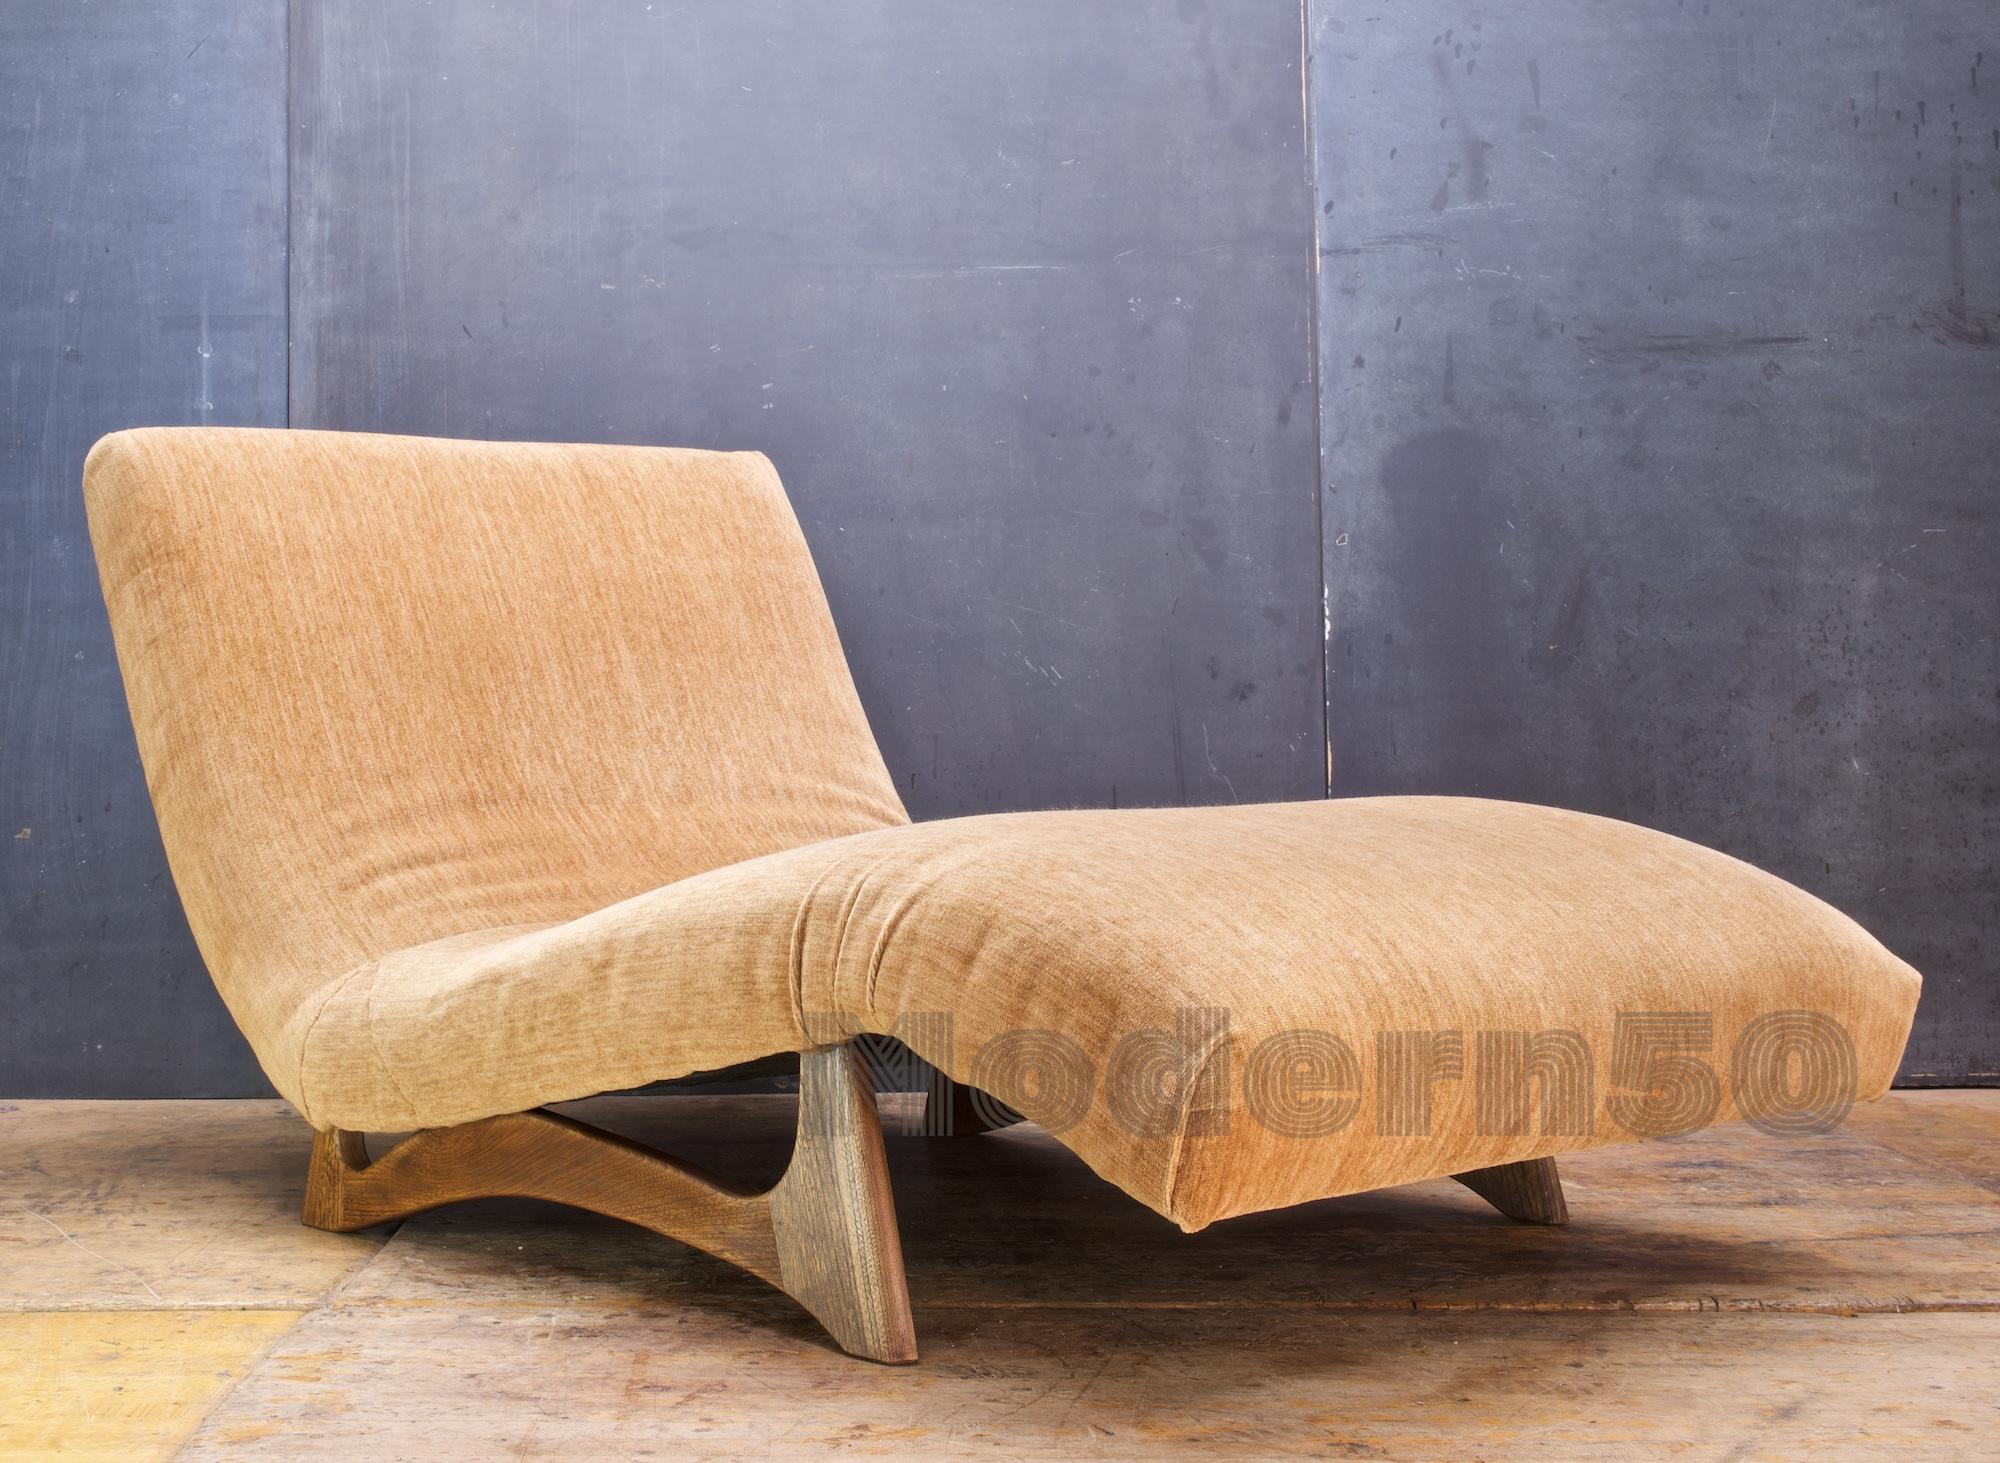 Mid-Century Modern 1950s Mid-Century Adrian Pearsall Wave Chaise Lounge Chair Daybed Doublewide